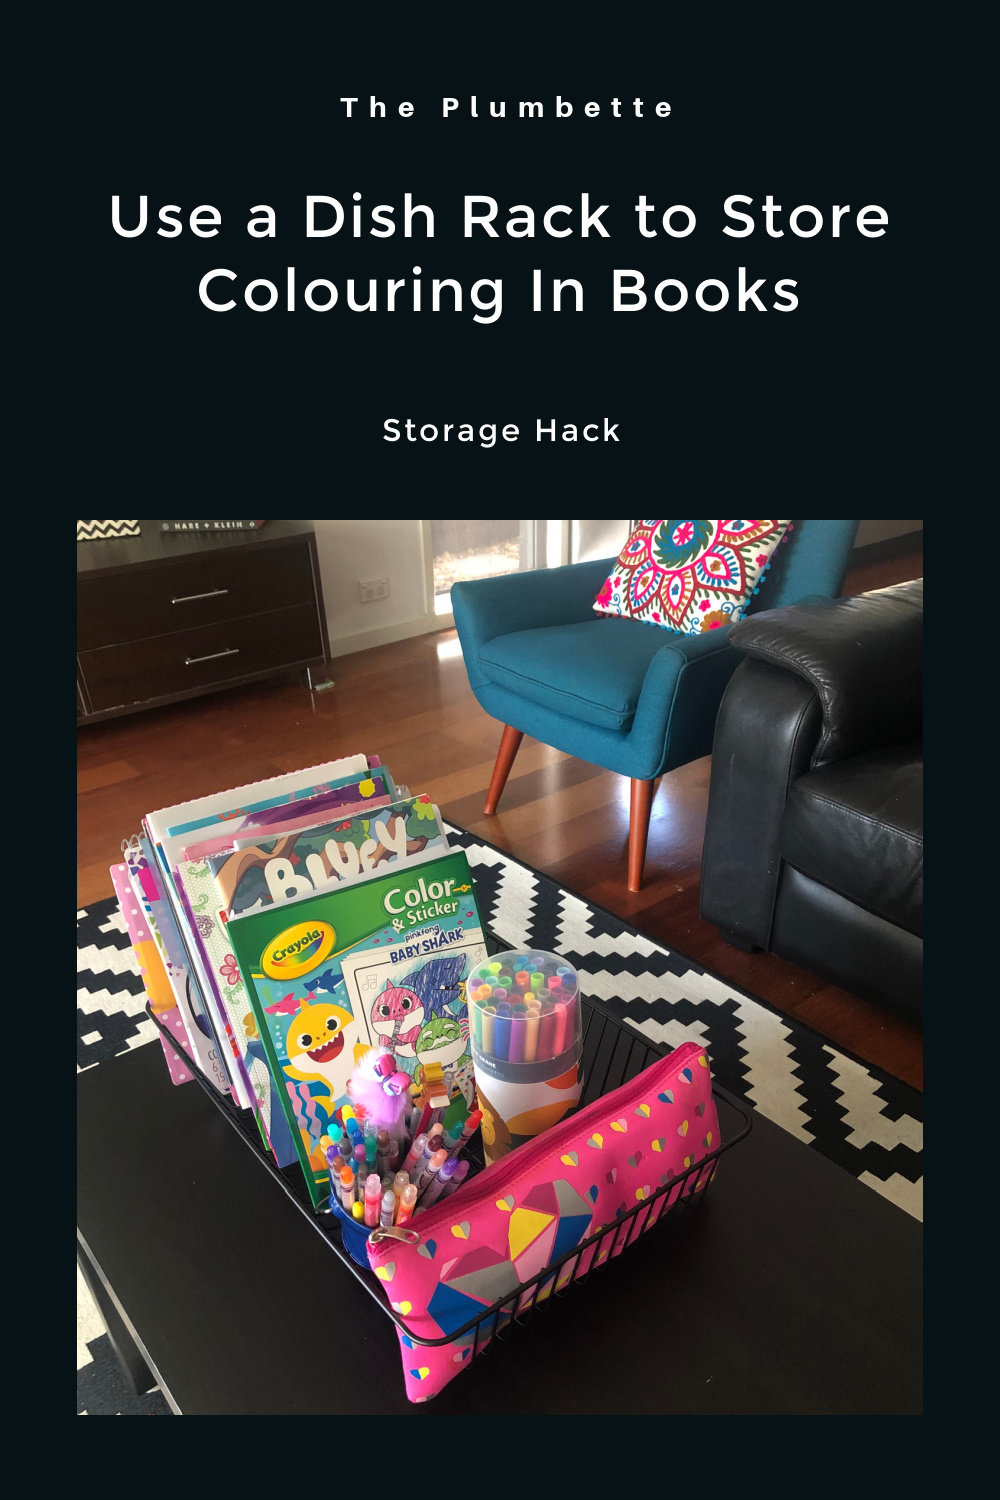 Use a Dish Rack For Colouring Book Storage - The Plumbette